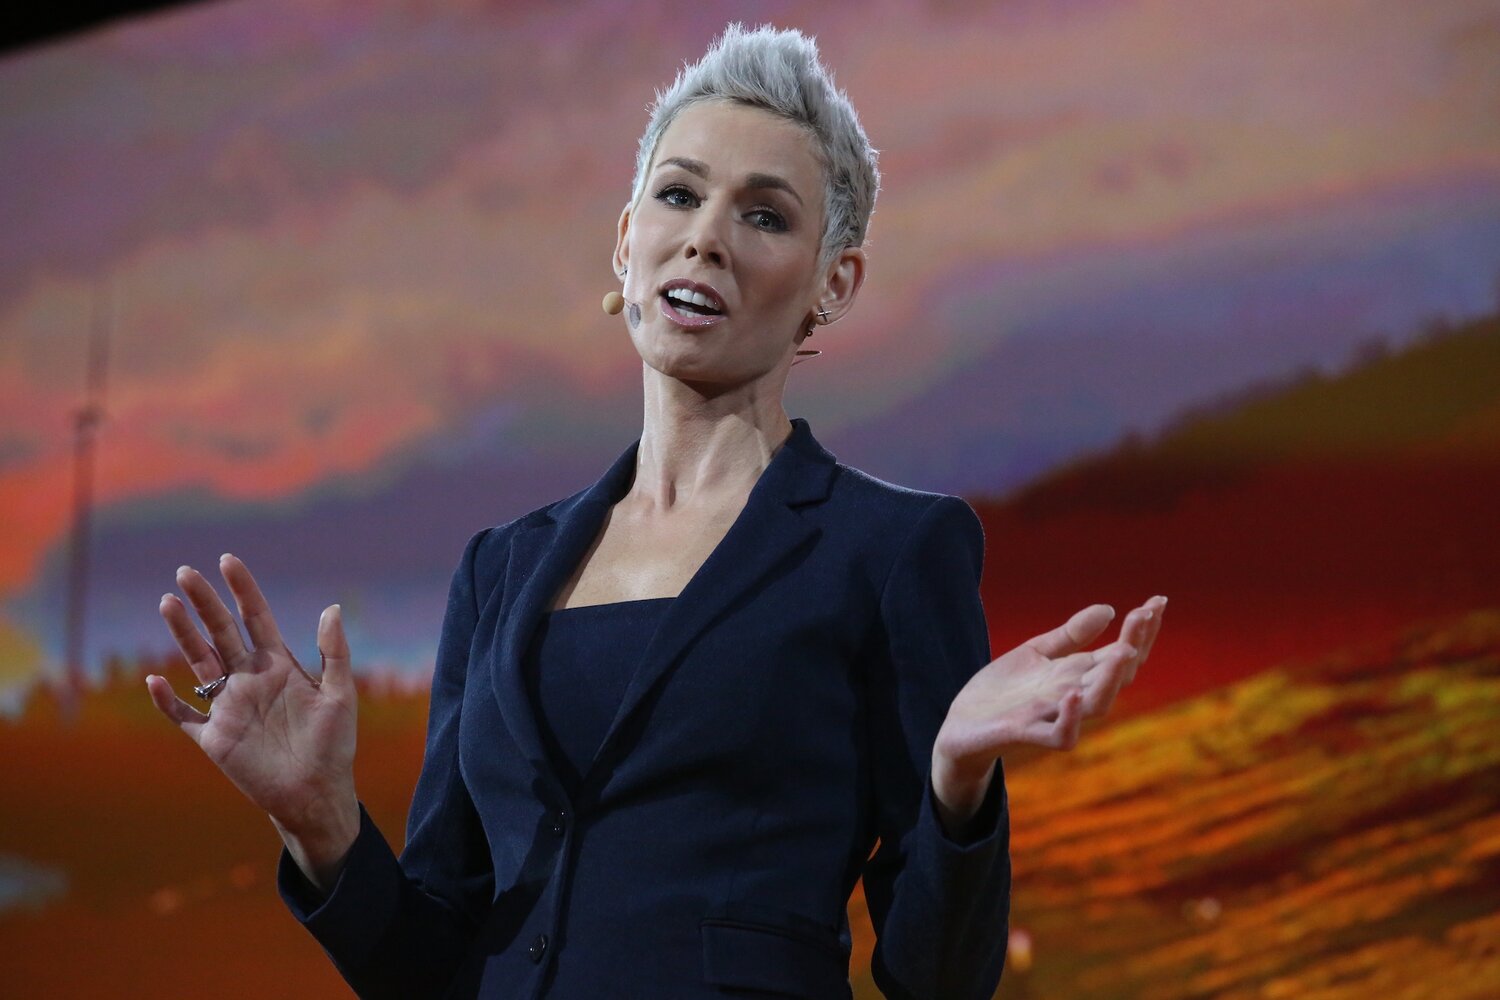 Gunhild Stordalen, Founder of the Eat Foundation, pictured at the 2017 Stockholm Food Forum. "The value of preserving biodiversity is greatly underestimated," she says. "If you ask people on the street about the importance of biodiversity to feed a growing world population, probably very few could answer. That's partly what we want to work together to do - increase awareness of how important this is." 